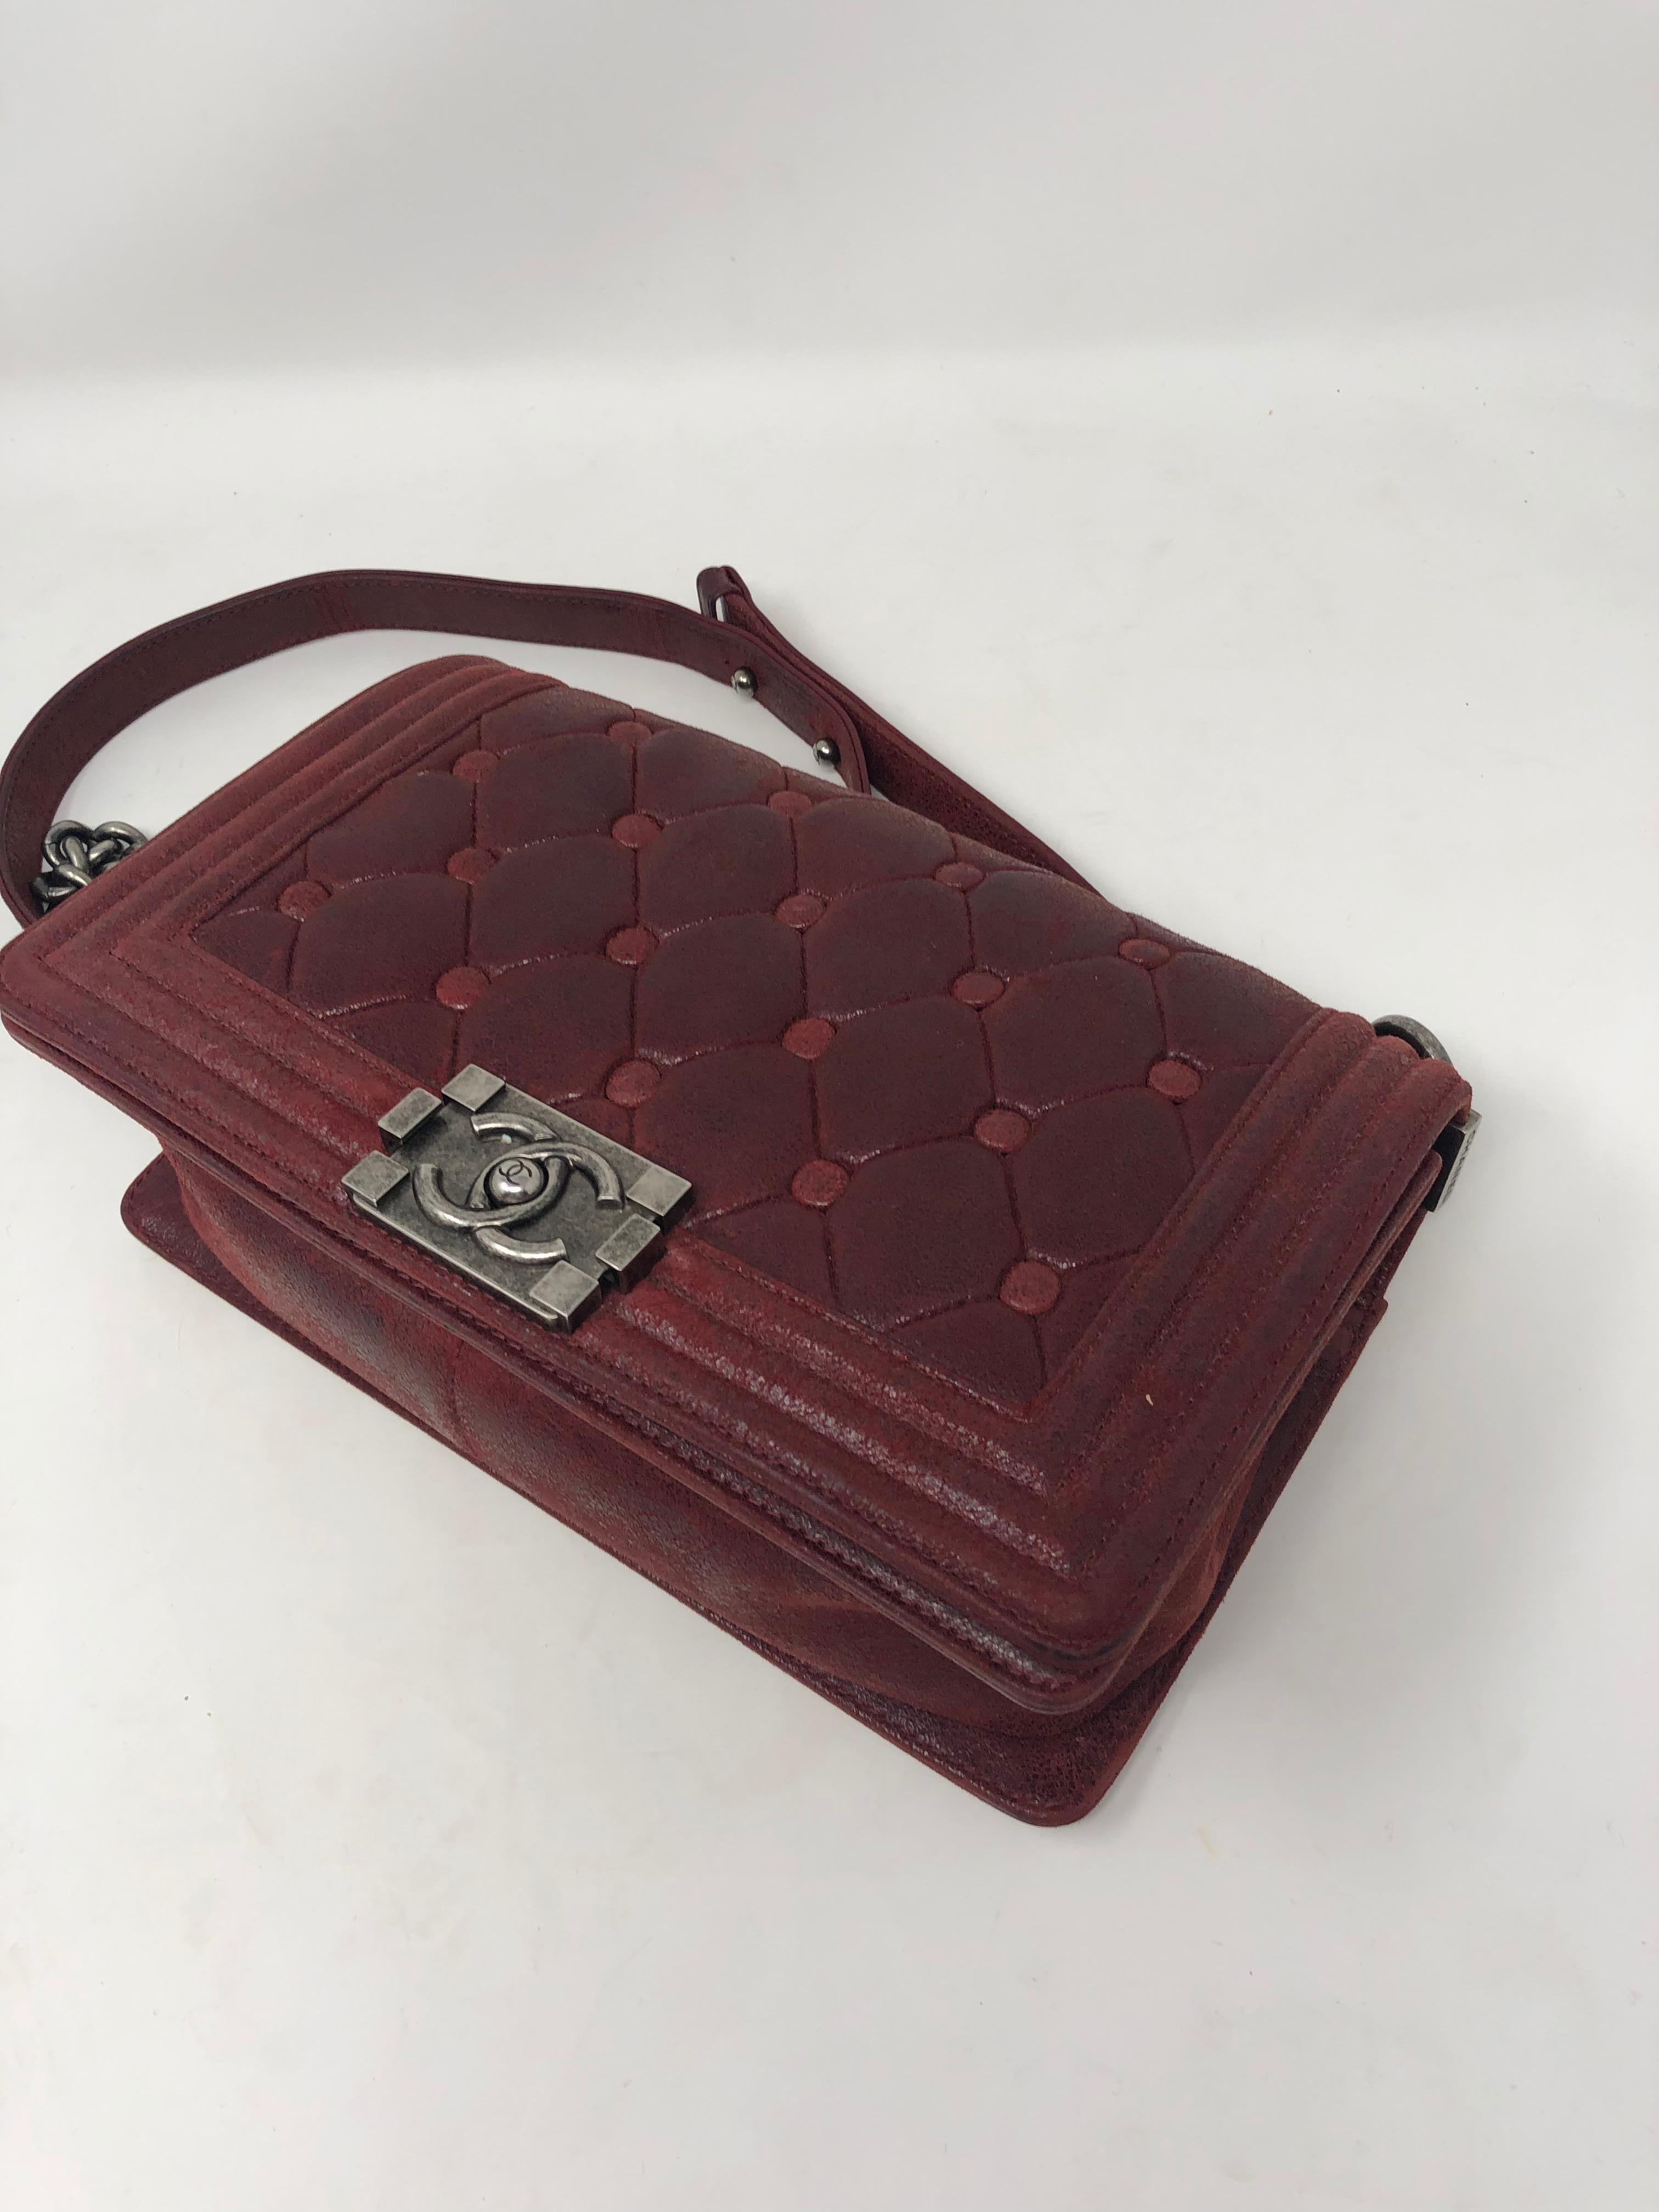 Chanel Burgundy Boy Bag Limited  In Good Condition For Sale In Athens, GA